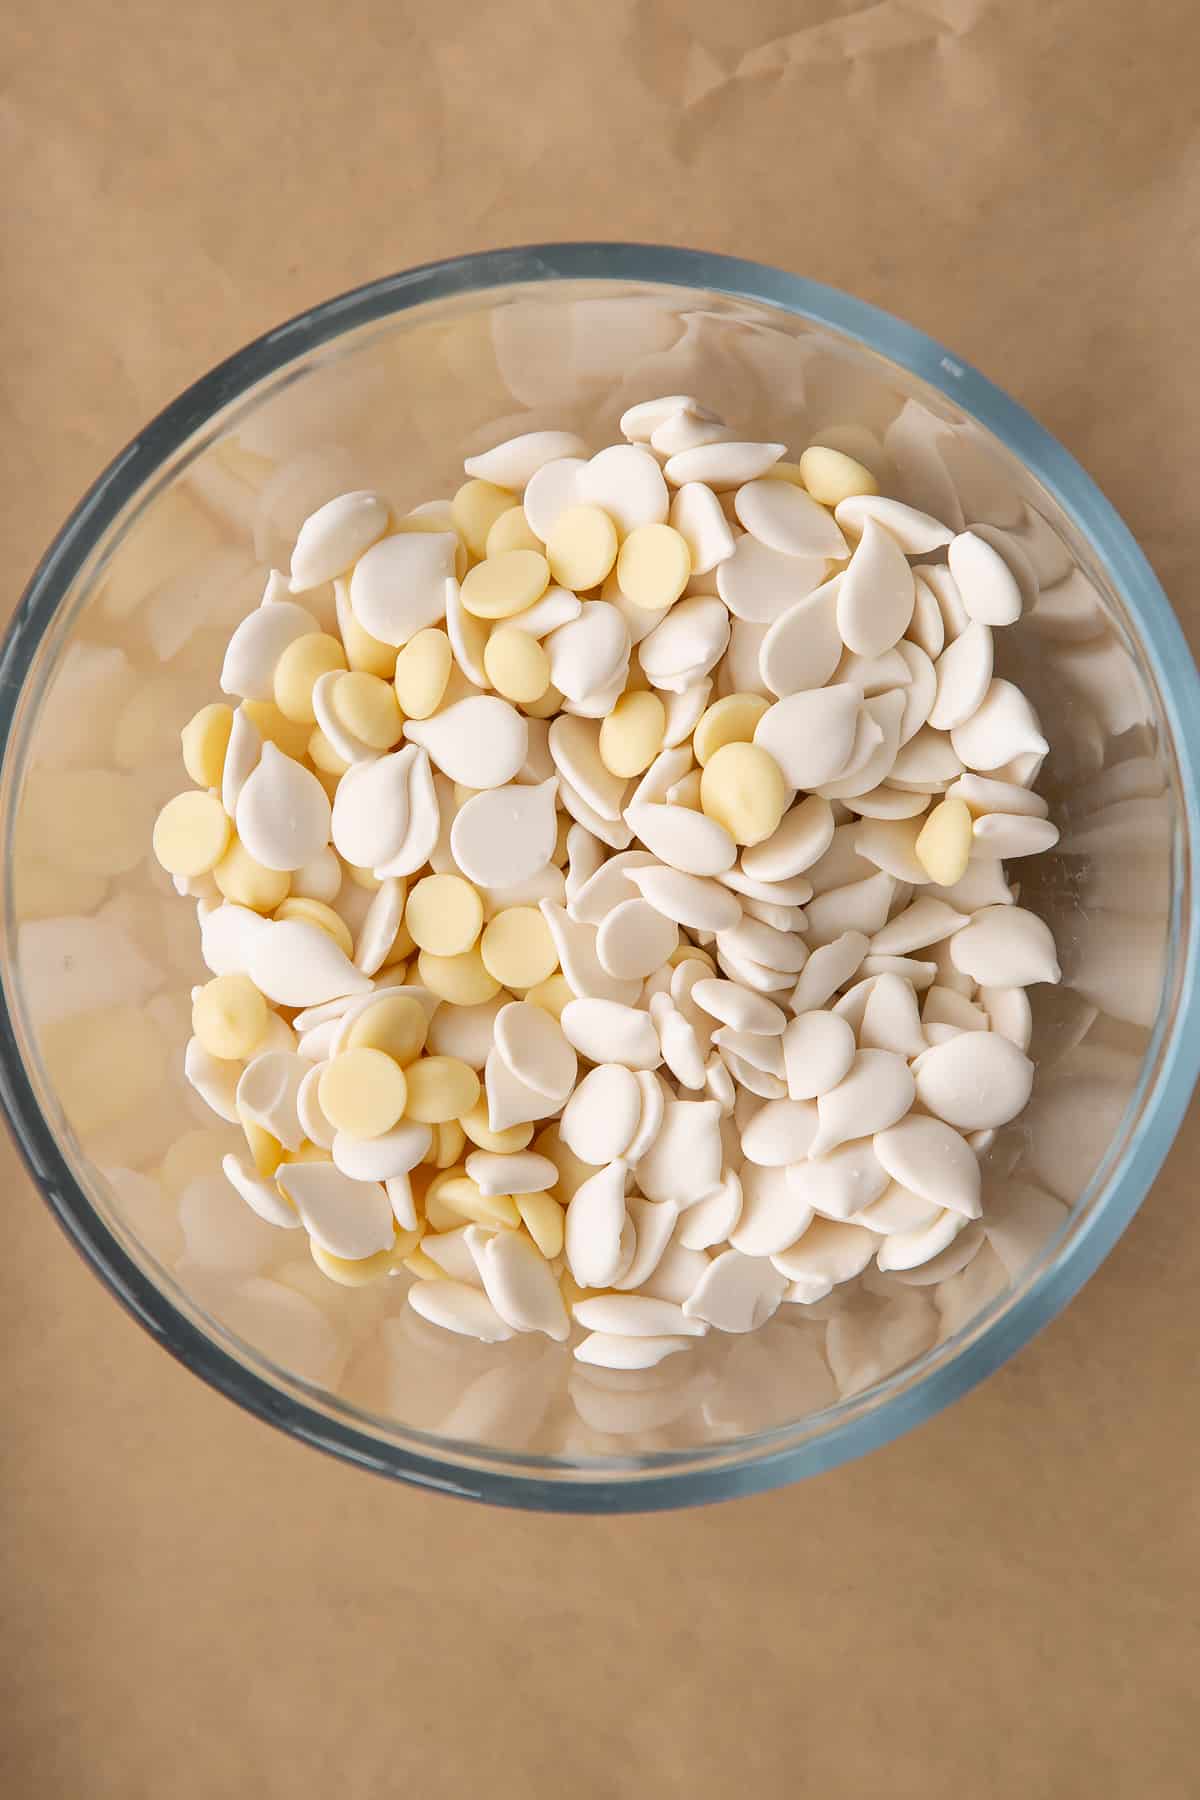 White chocolate and white candy melts in a heatproof bowl.